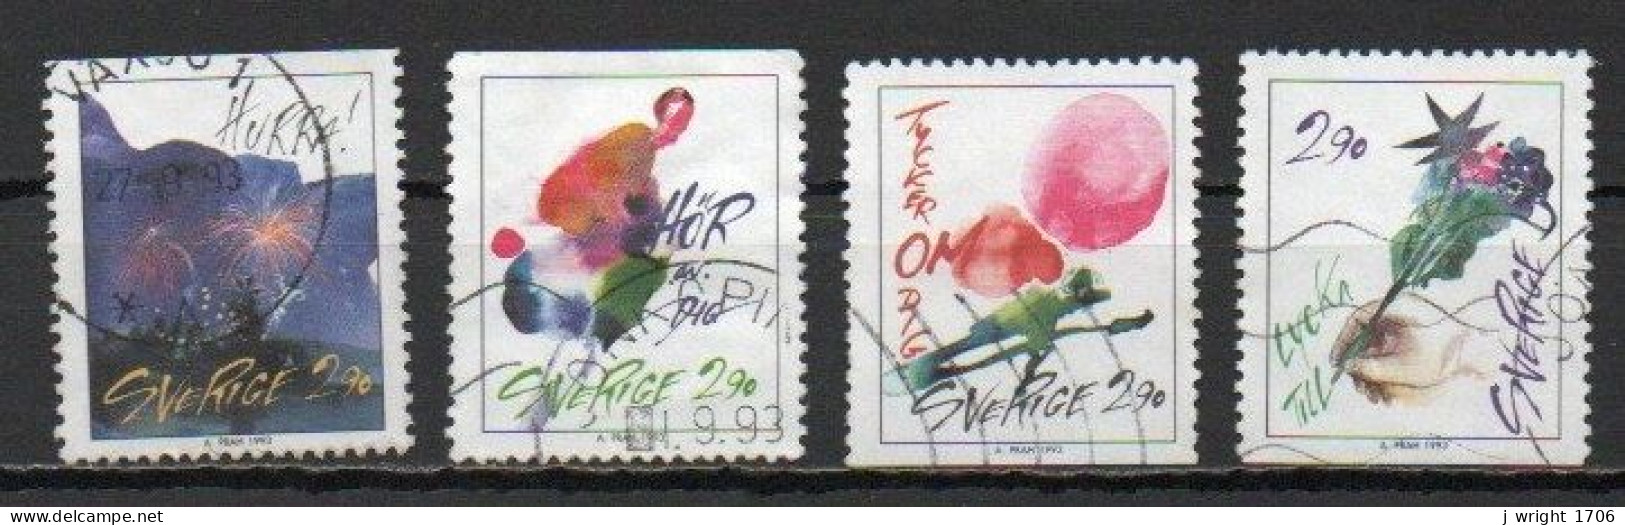 Sweden, 1993, Greetings Stamps, Set, USED - Used Stamps